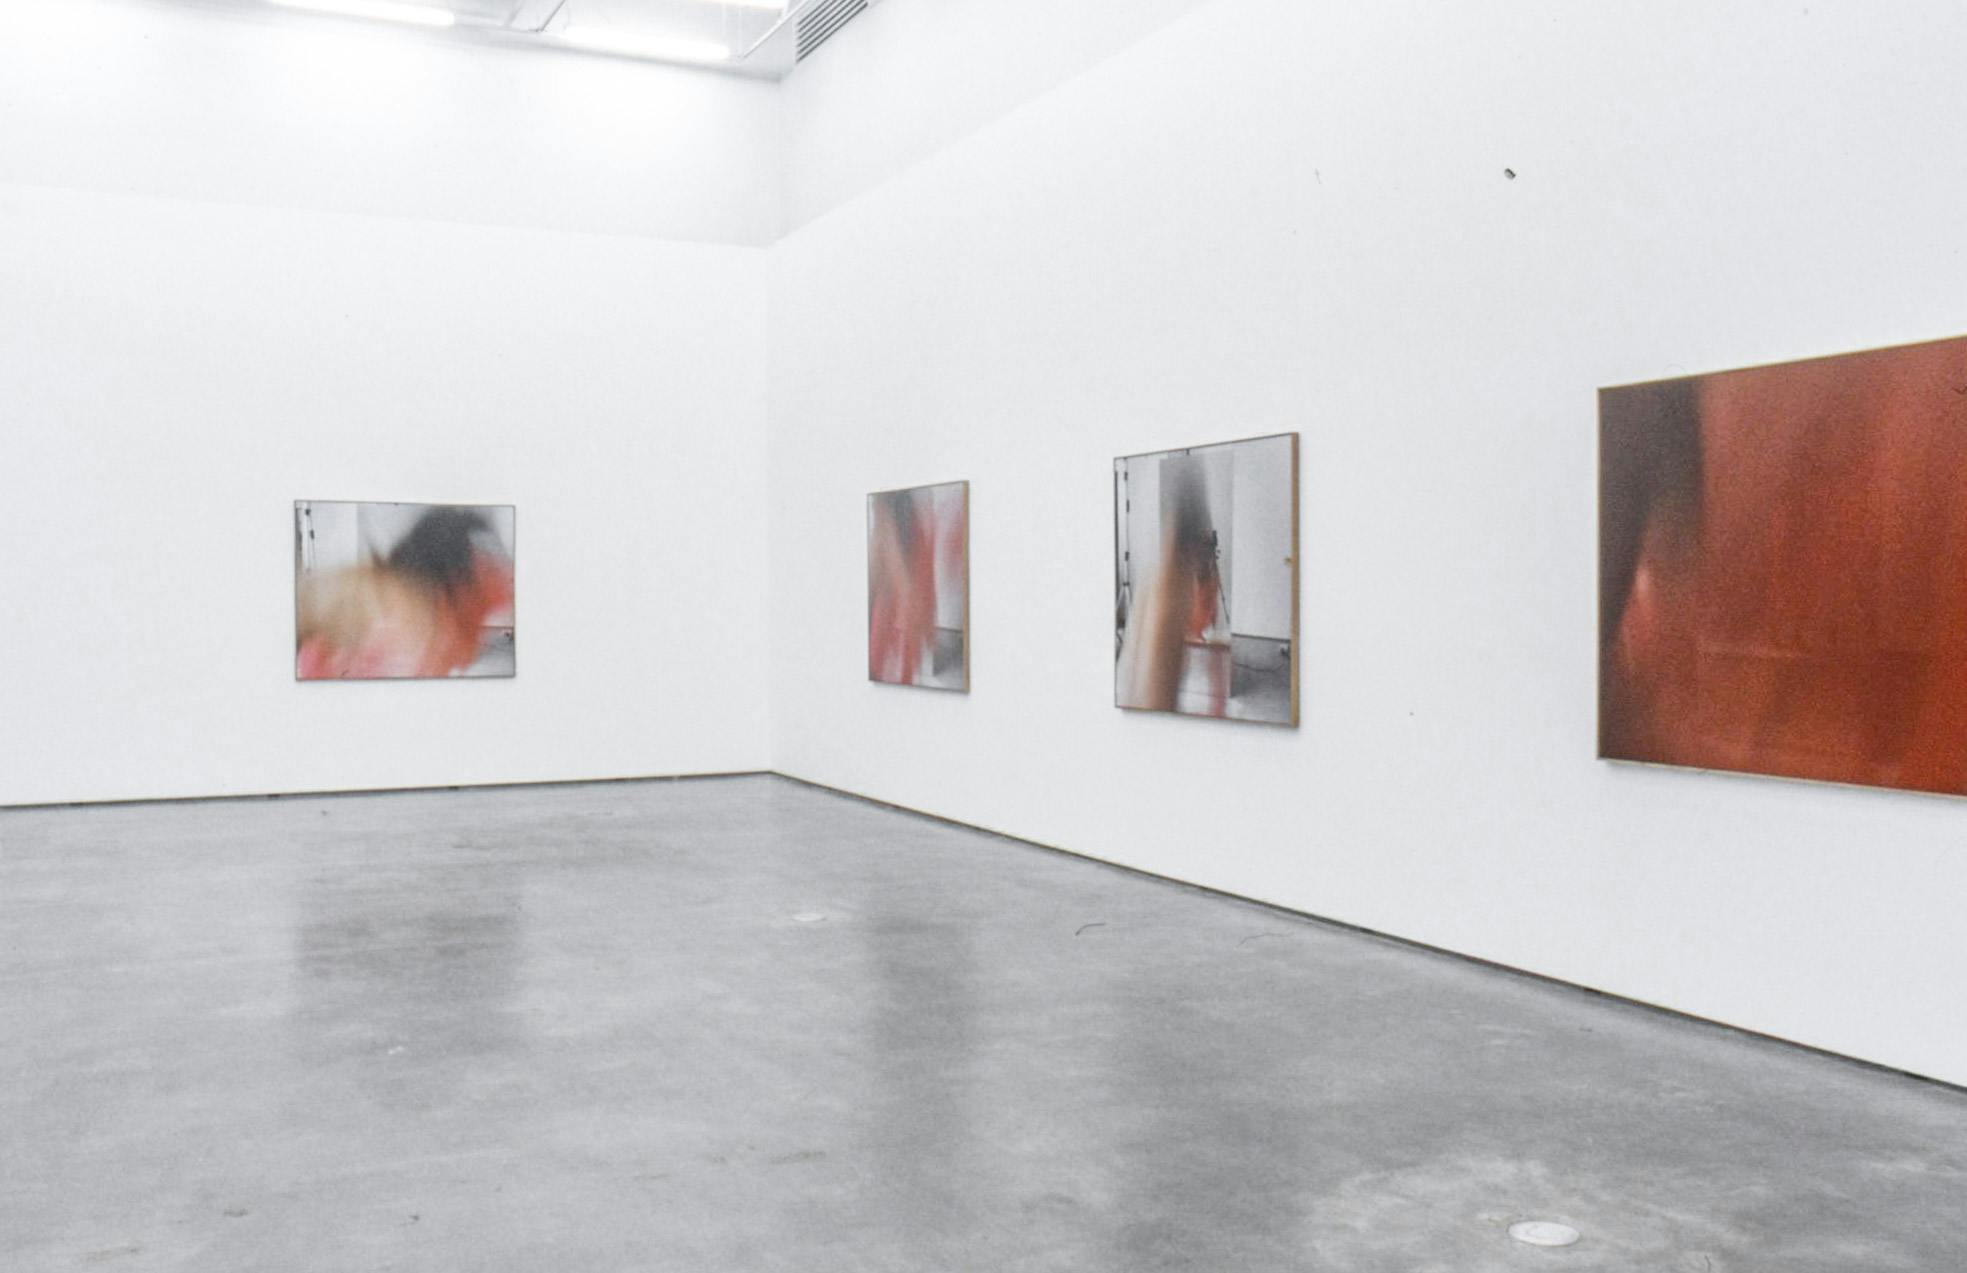 Large-sized photographs are installed on the gallery walls. Four photographs visible in this image all show blurred images of a person dancing with a piece of red-coloured fabric. 